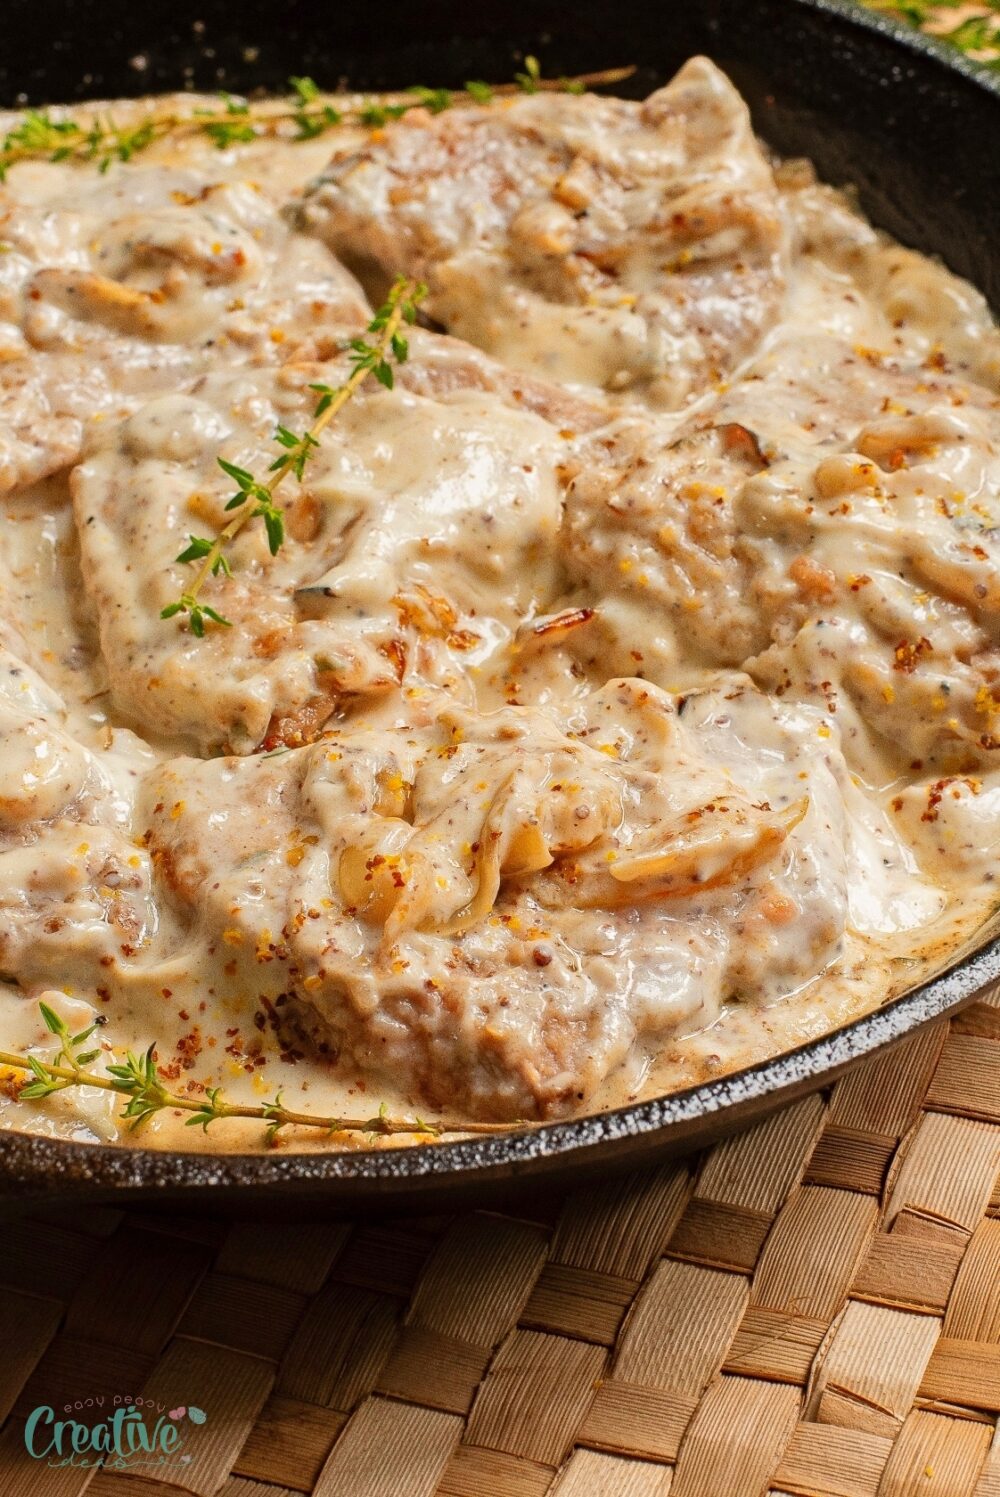 Treat yourself to a delectable pork loin in a creamy mustard sauce, a dish that will leave you wanting seconds!